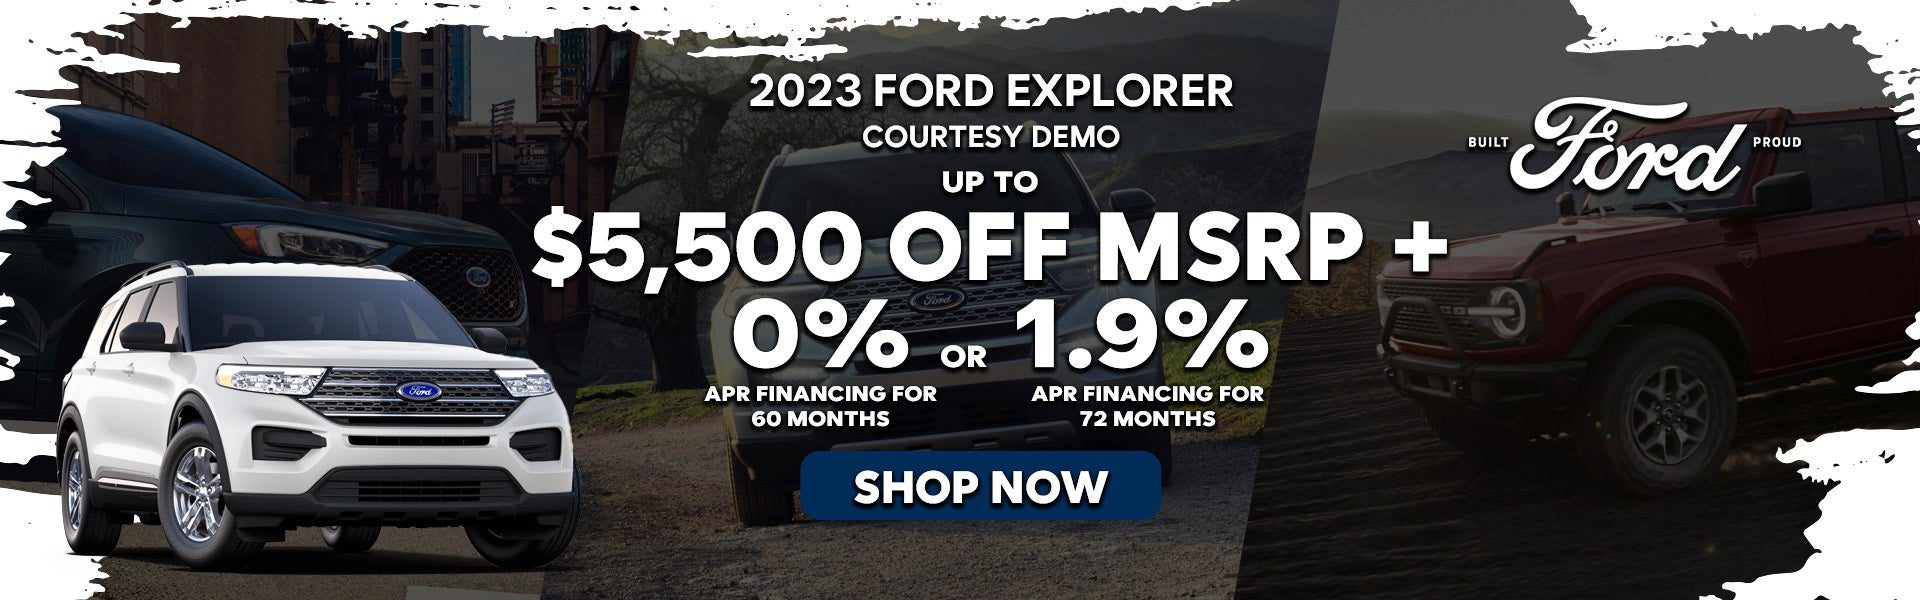 2023 Ford Explorer Courtesy Vehicle Special Offer